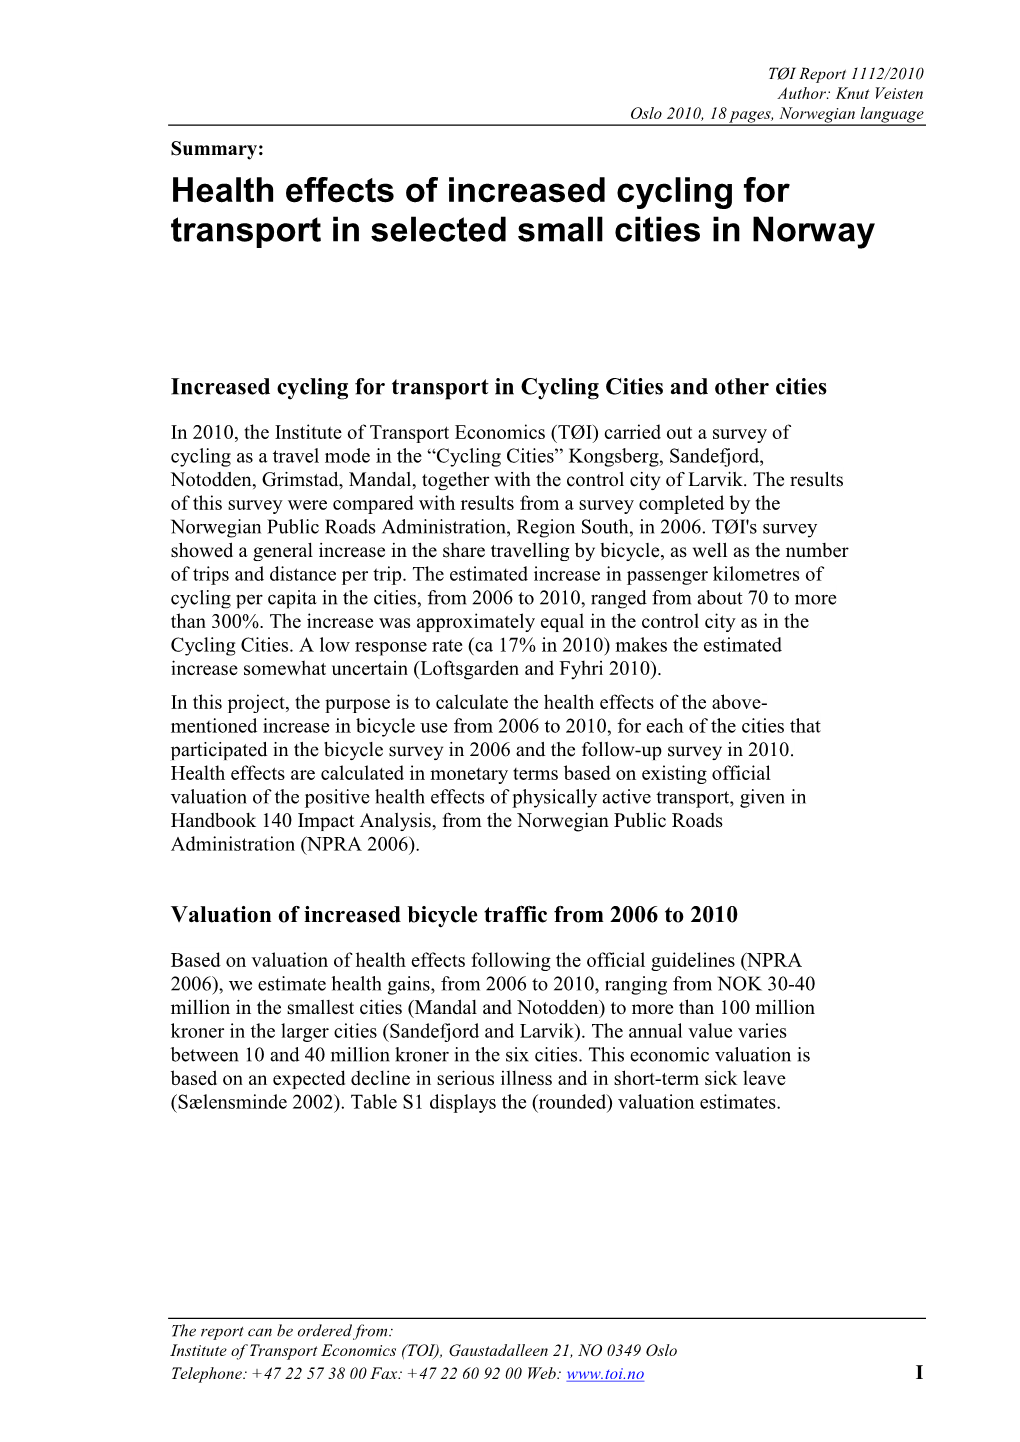 Health Effects of Increased Cycling for Transport in Selected Small Cities in Norway